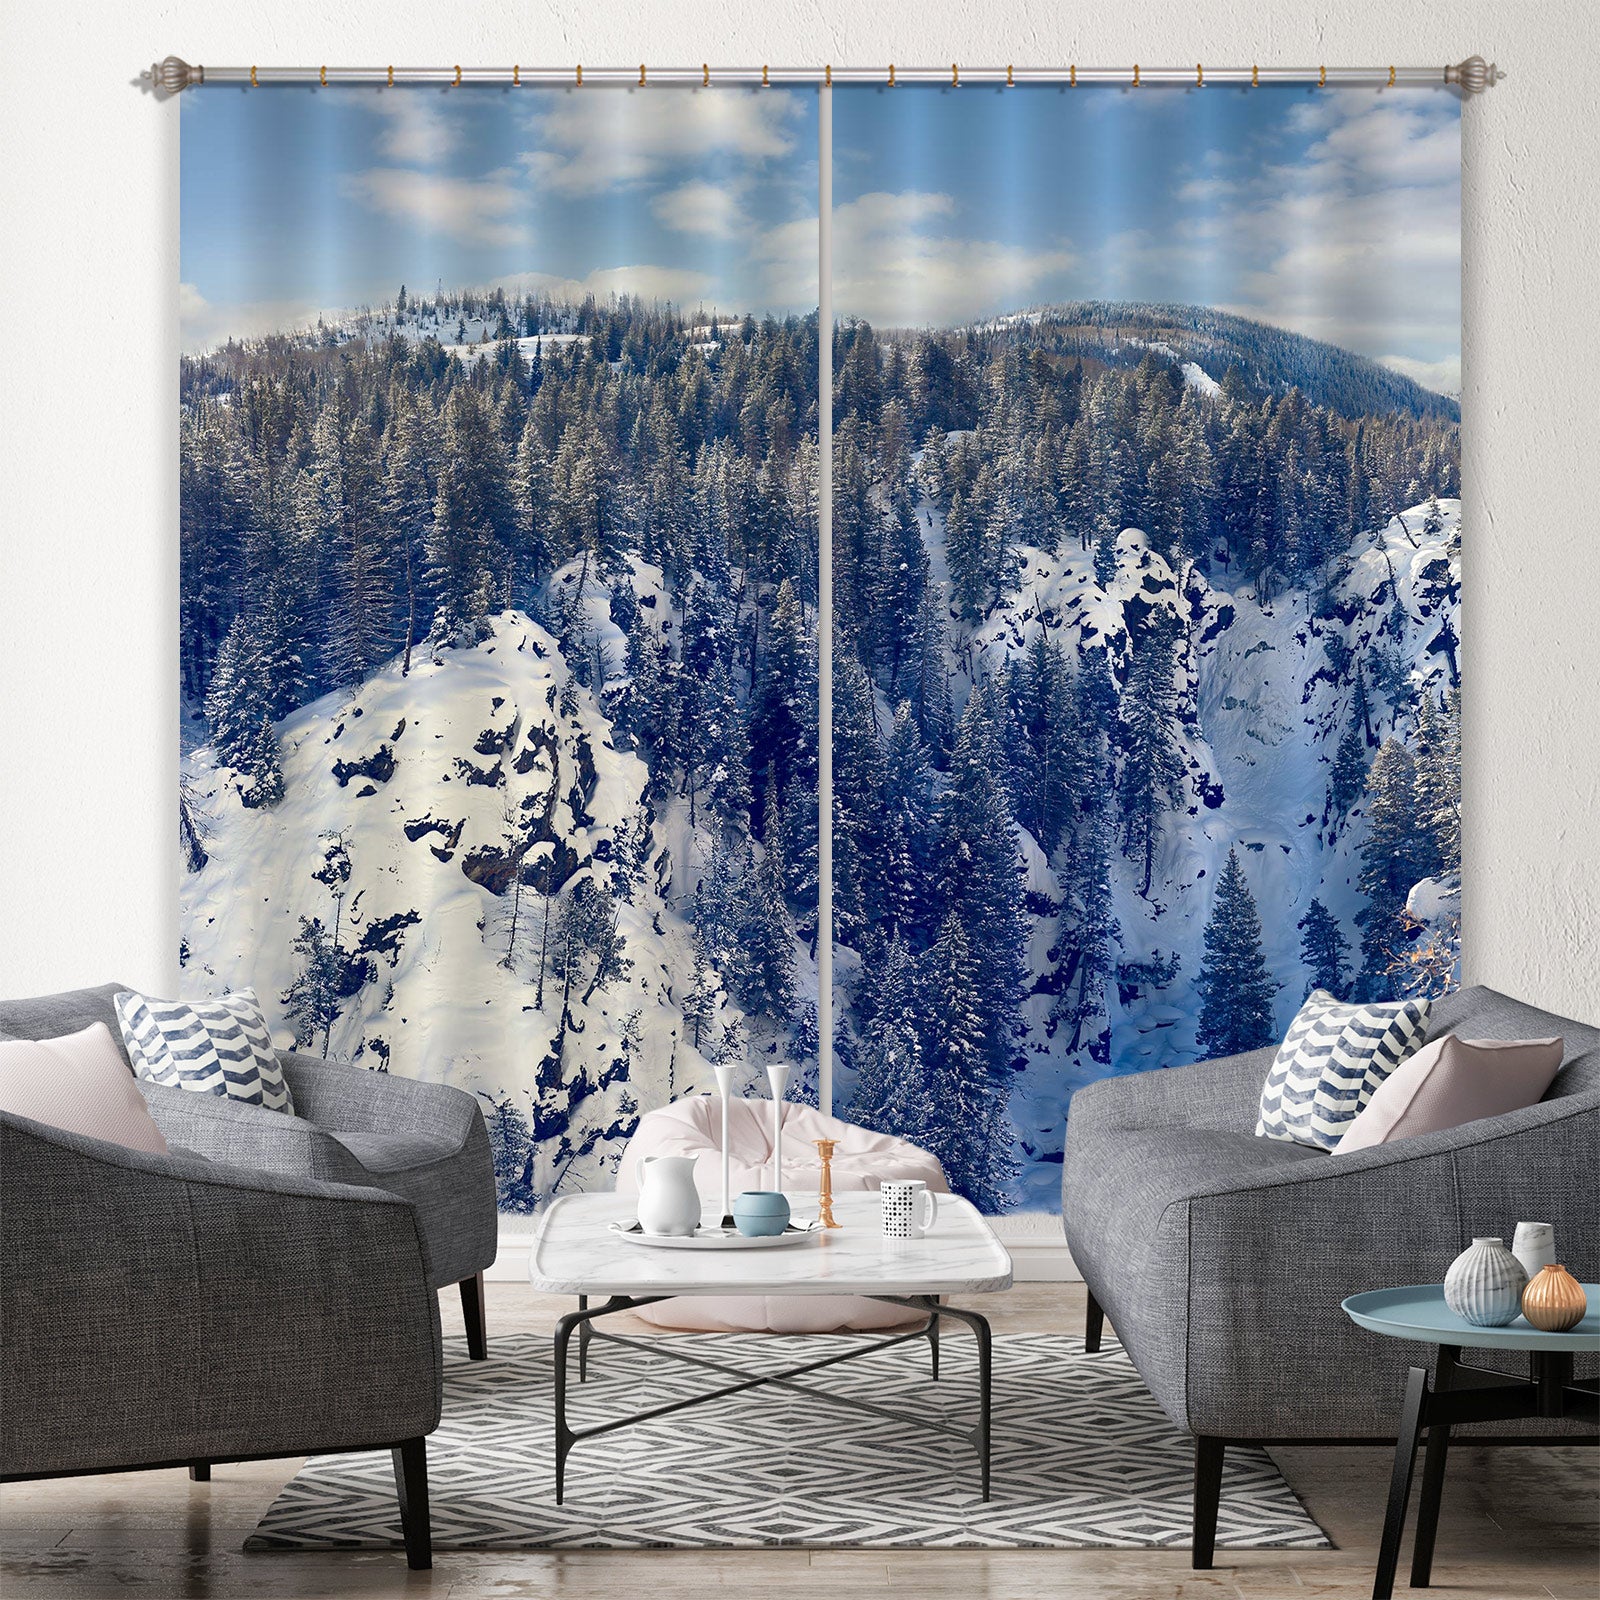 3D Snow Forest 5329 Beth Sheridan Curtain Curtains Drapes